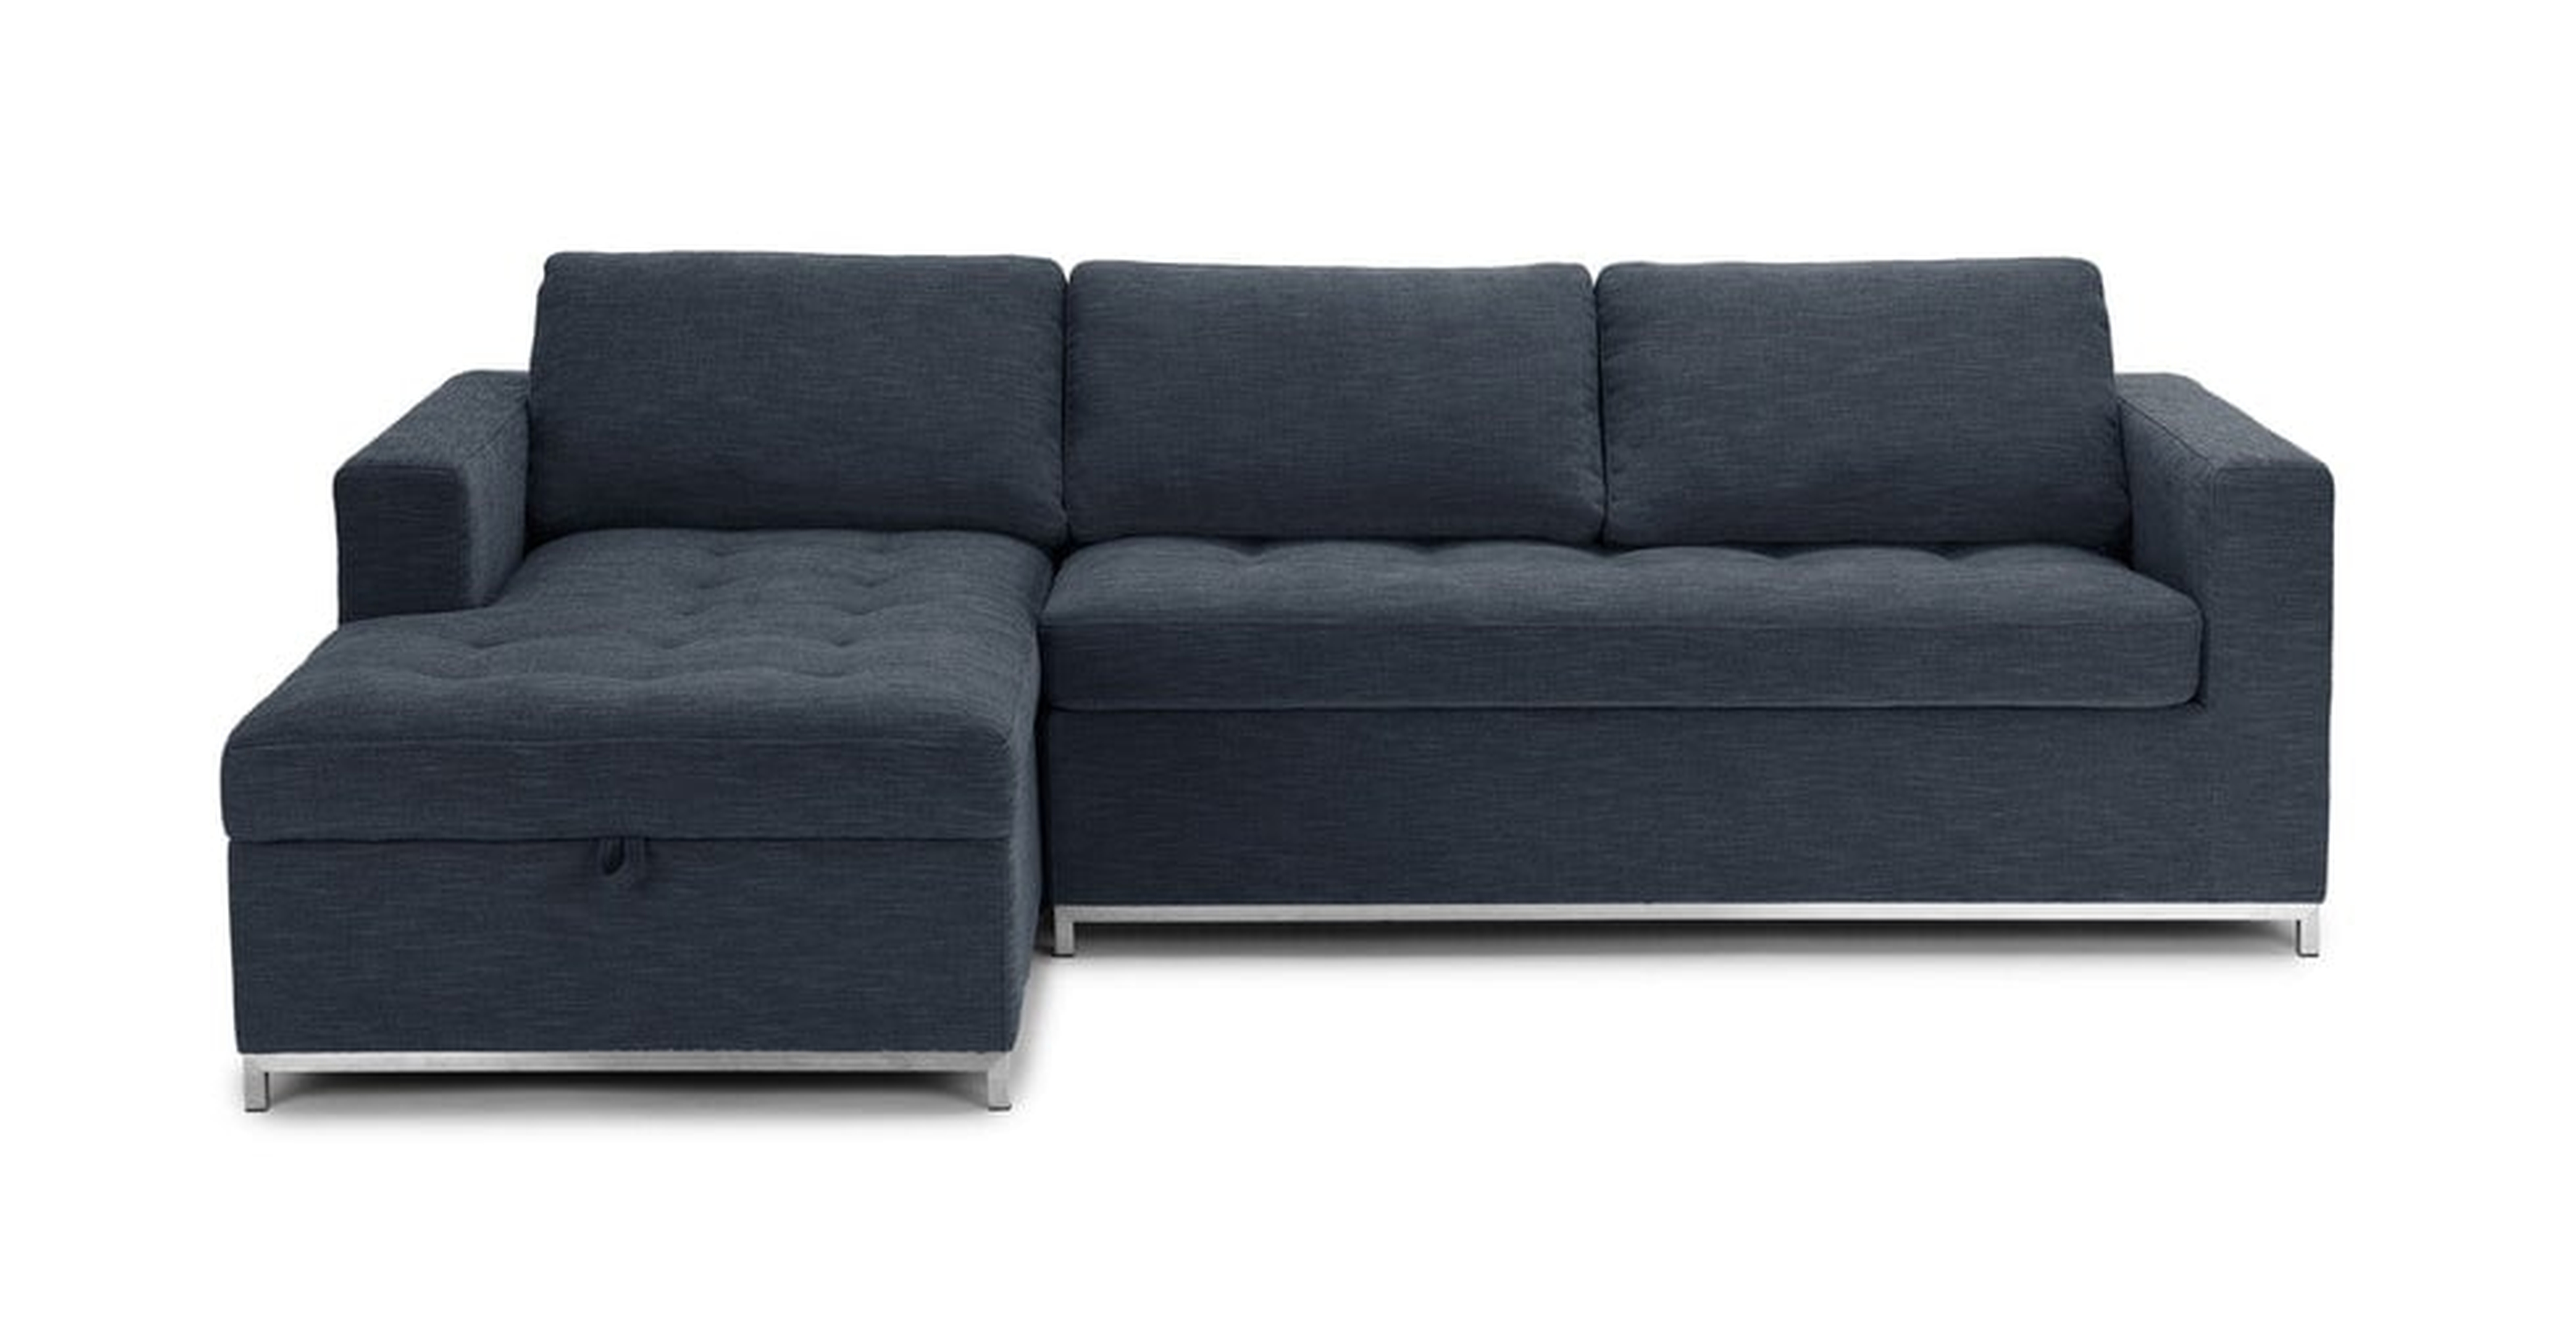 Soma Midnight Blue Left Sofa Bed - Article